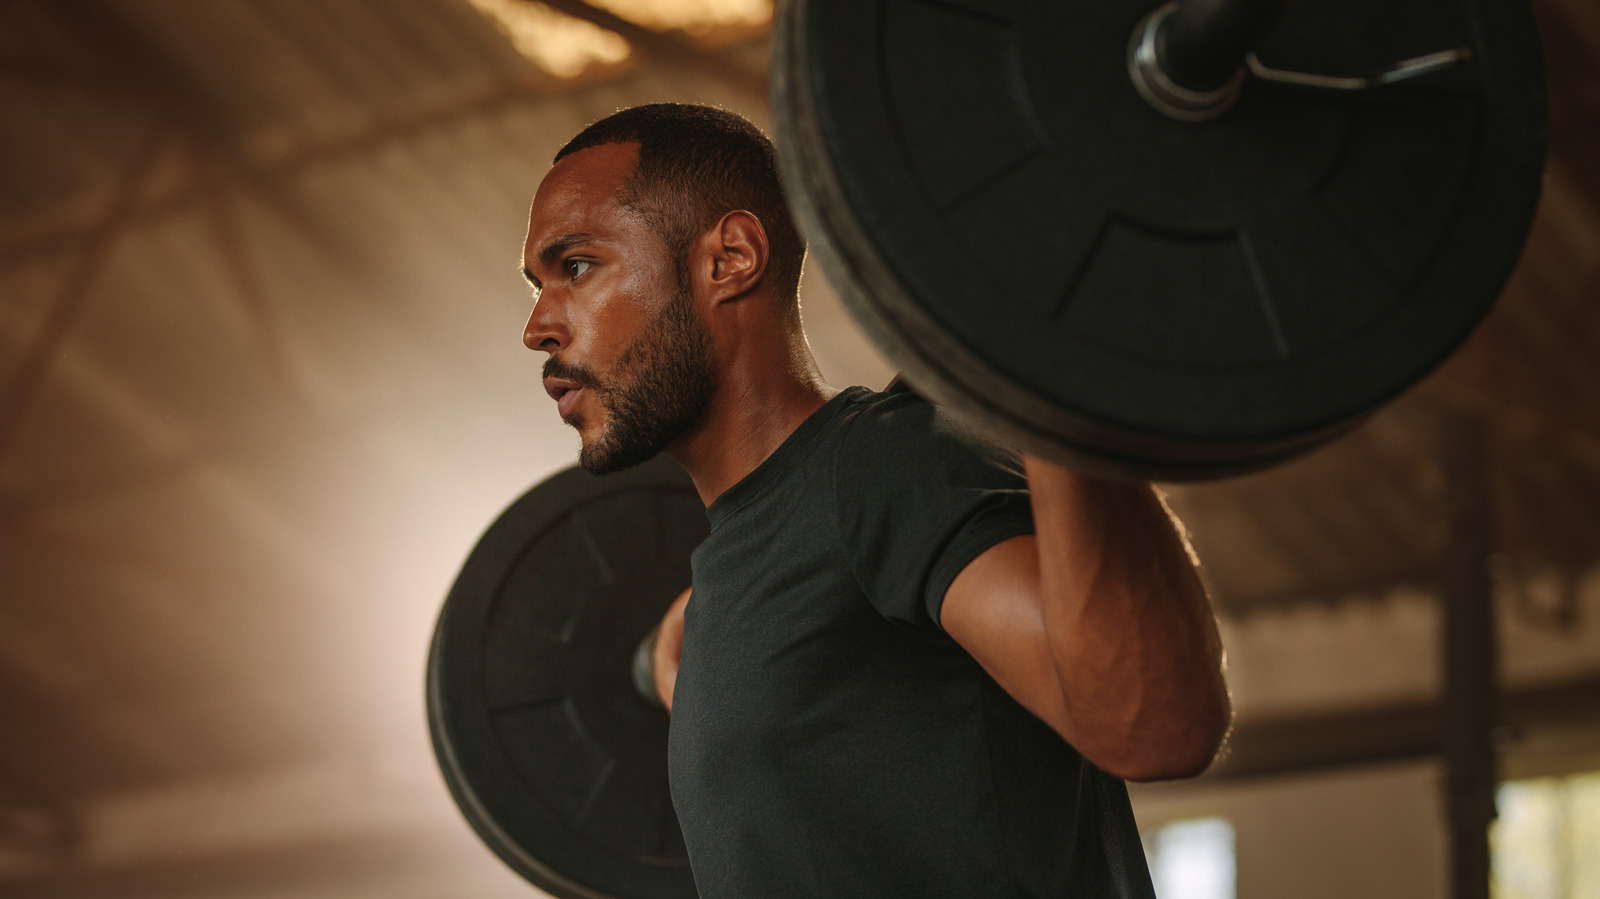 One Benefit of Strength Training that might surprise you